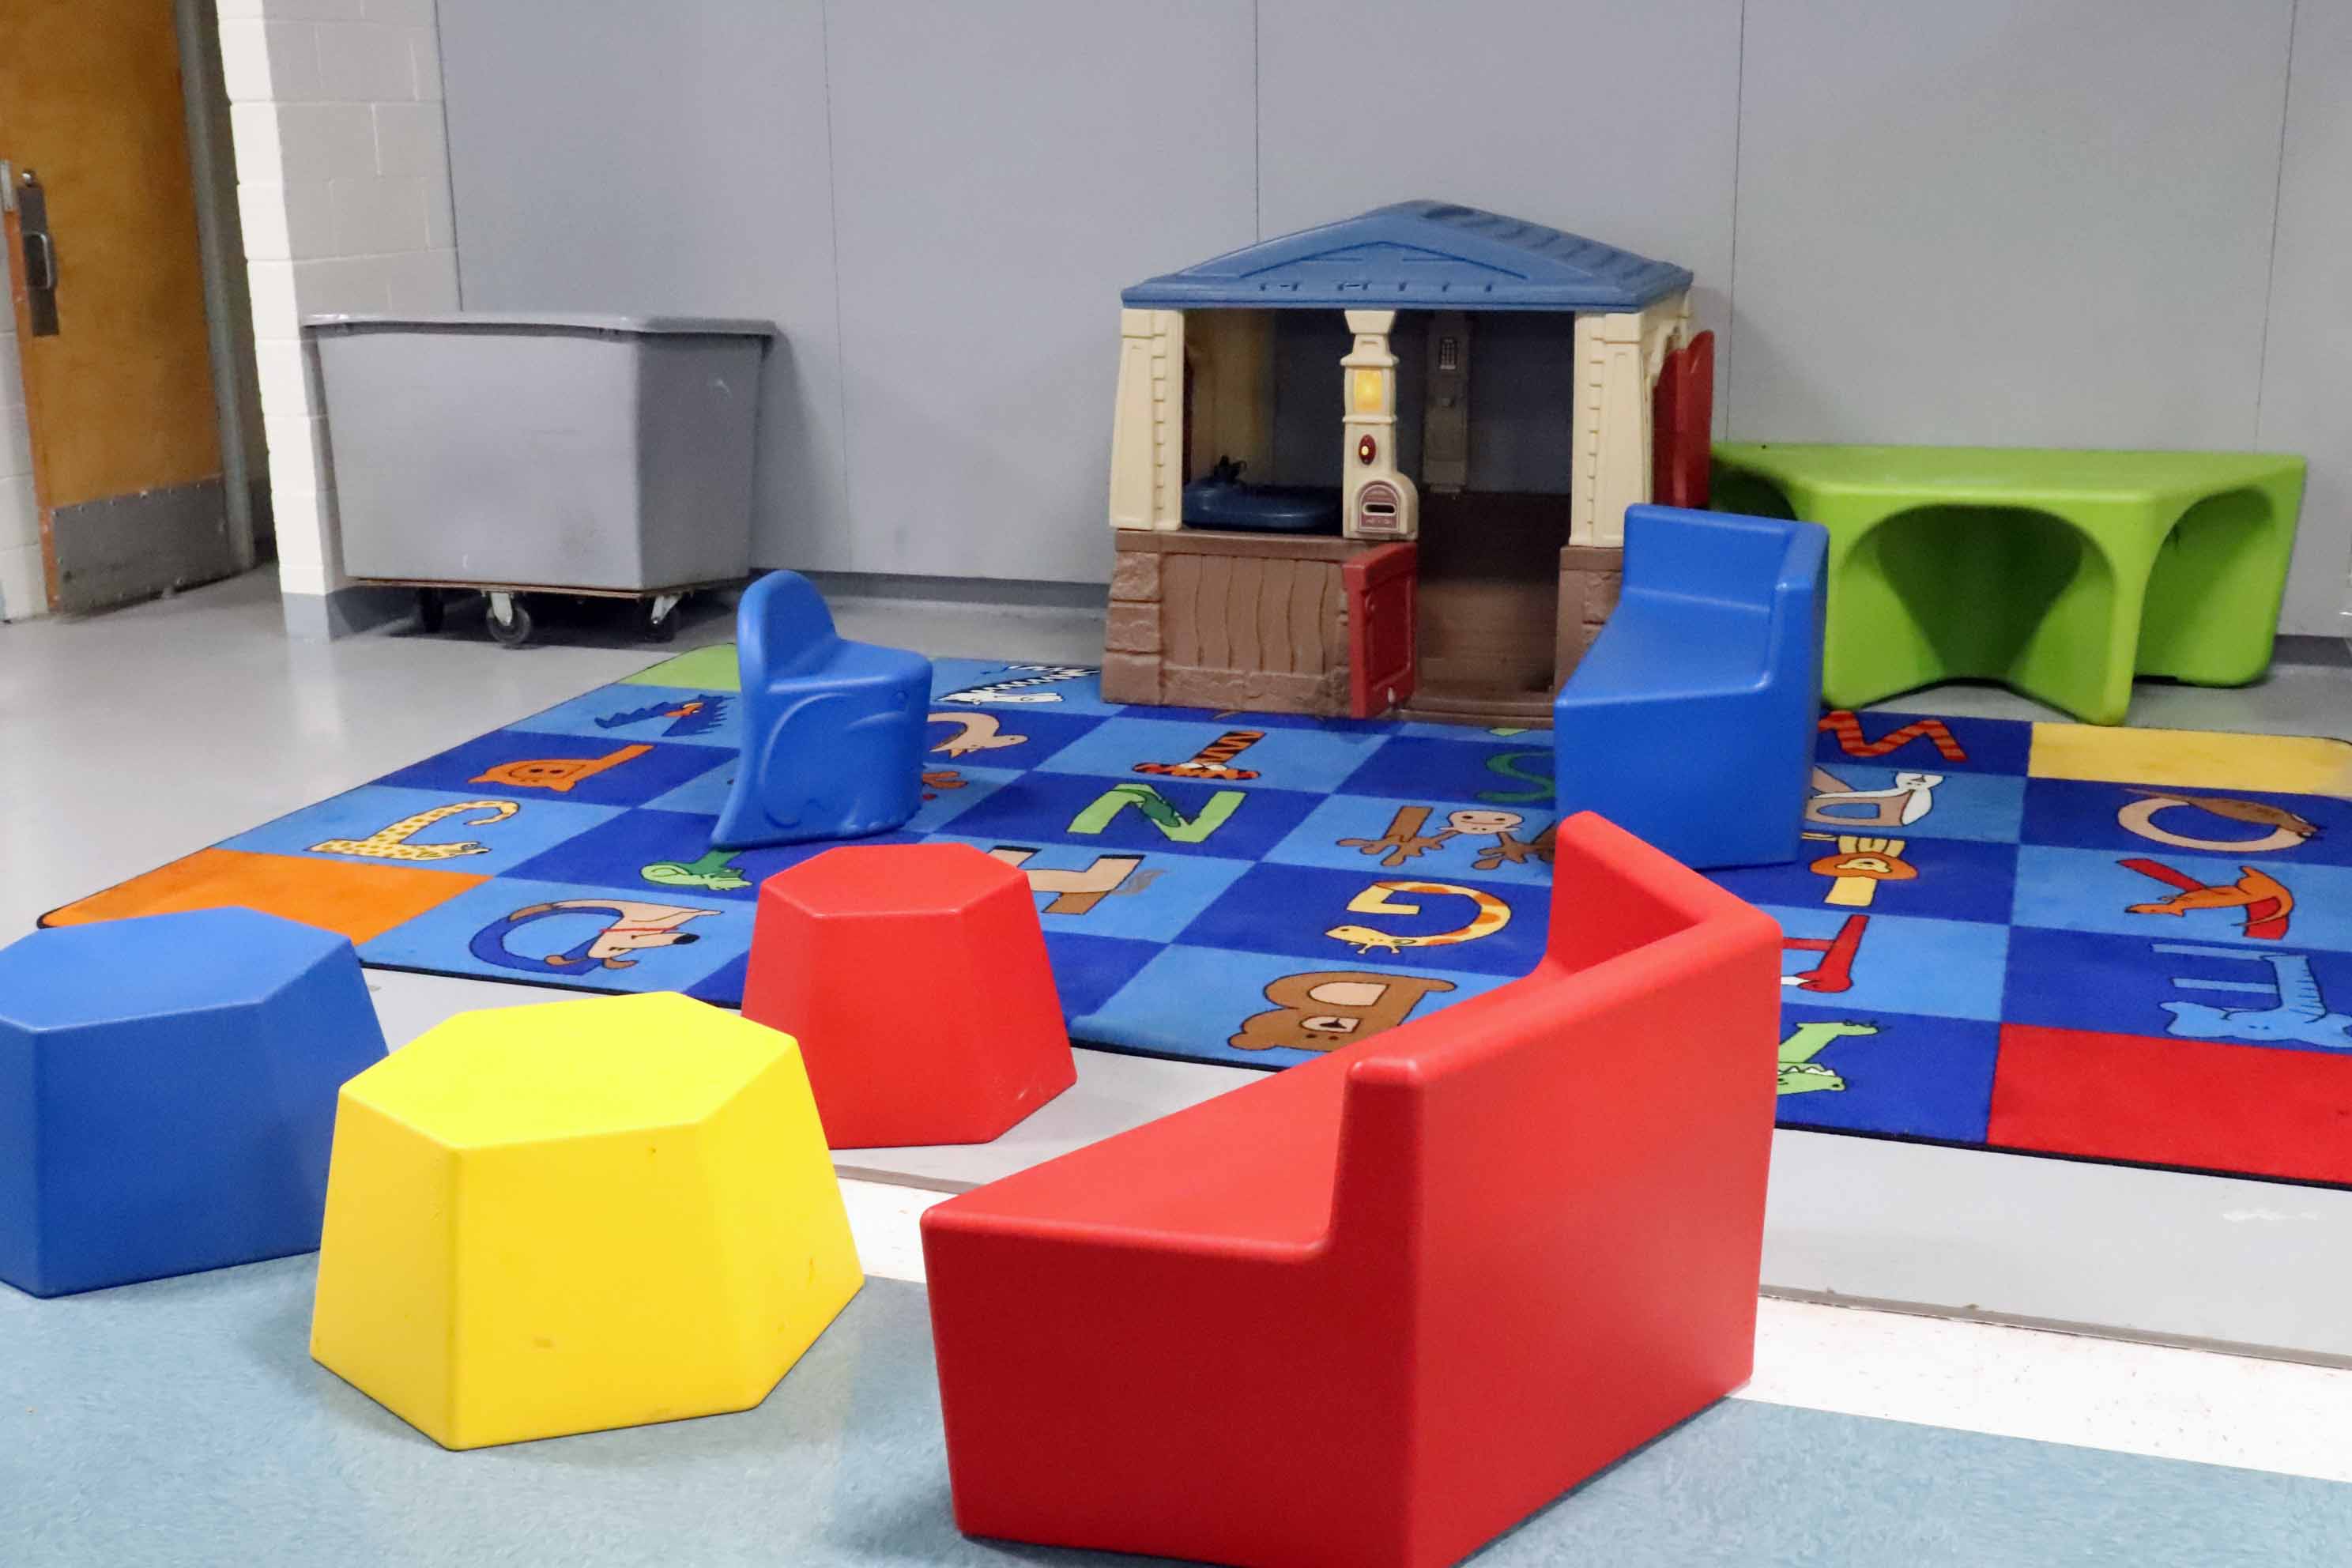 Children play area, several kid chairs with a small playhouse and an alphabet rug